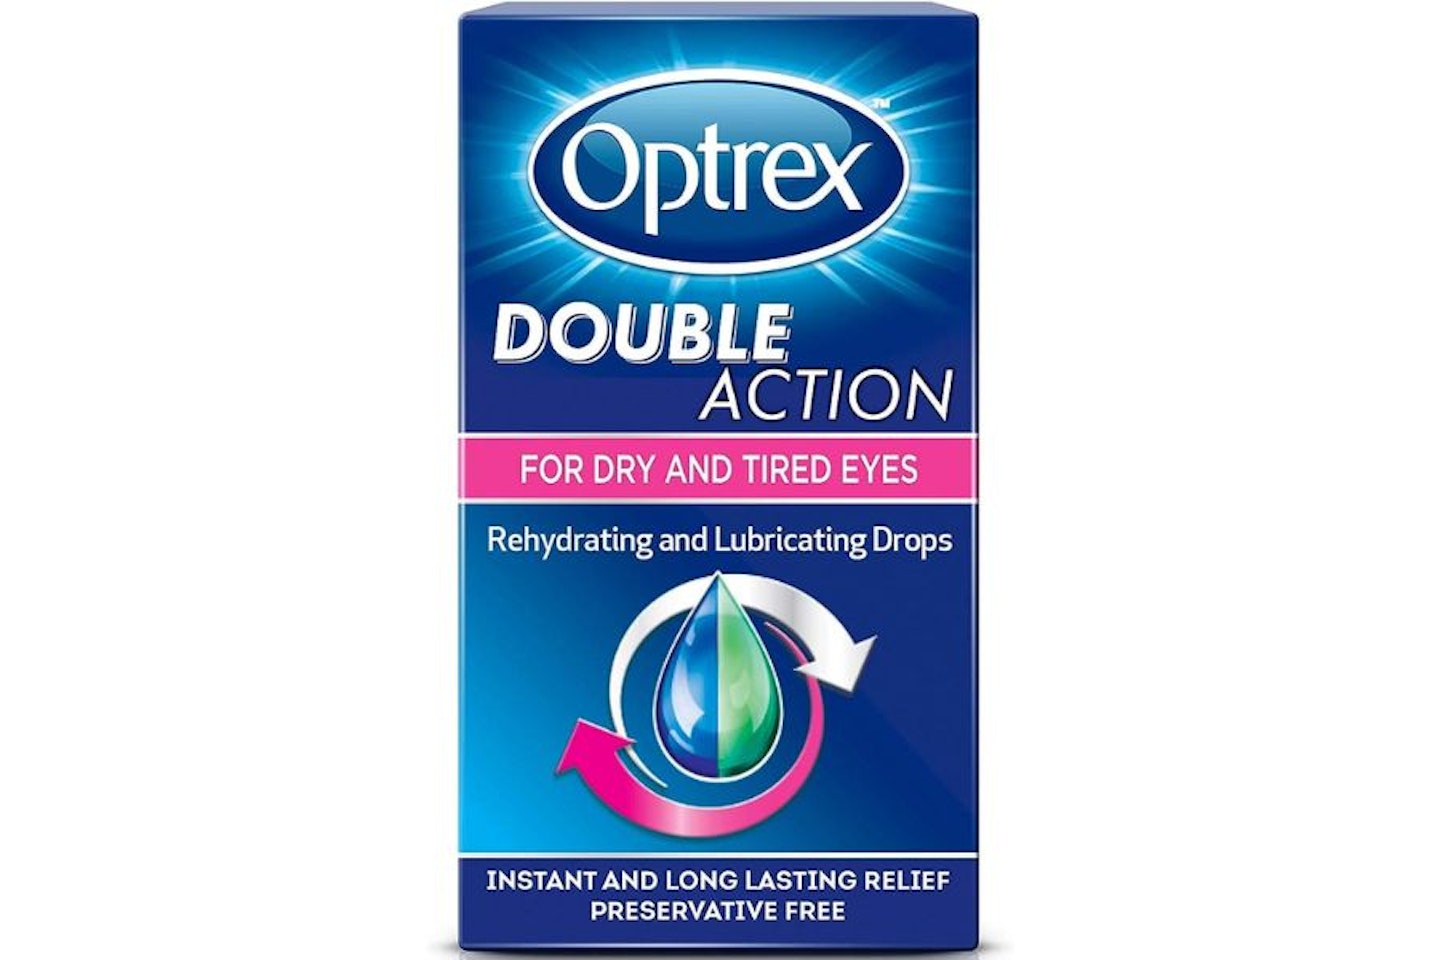 Optrex Drops For Dry & Tired Eyes